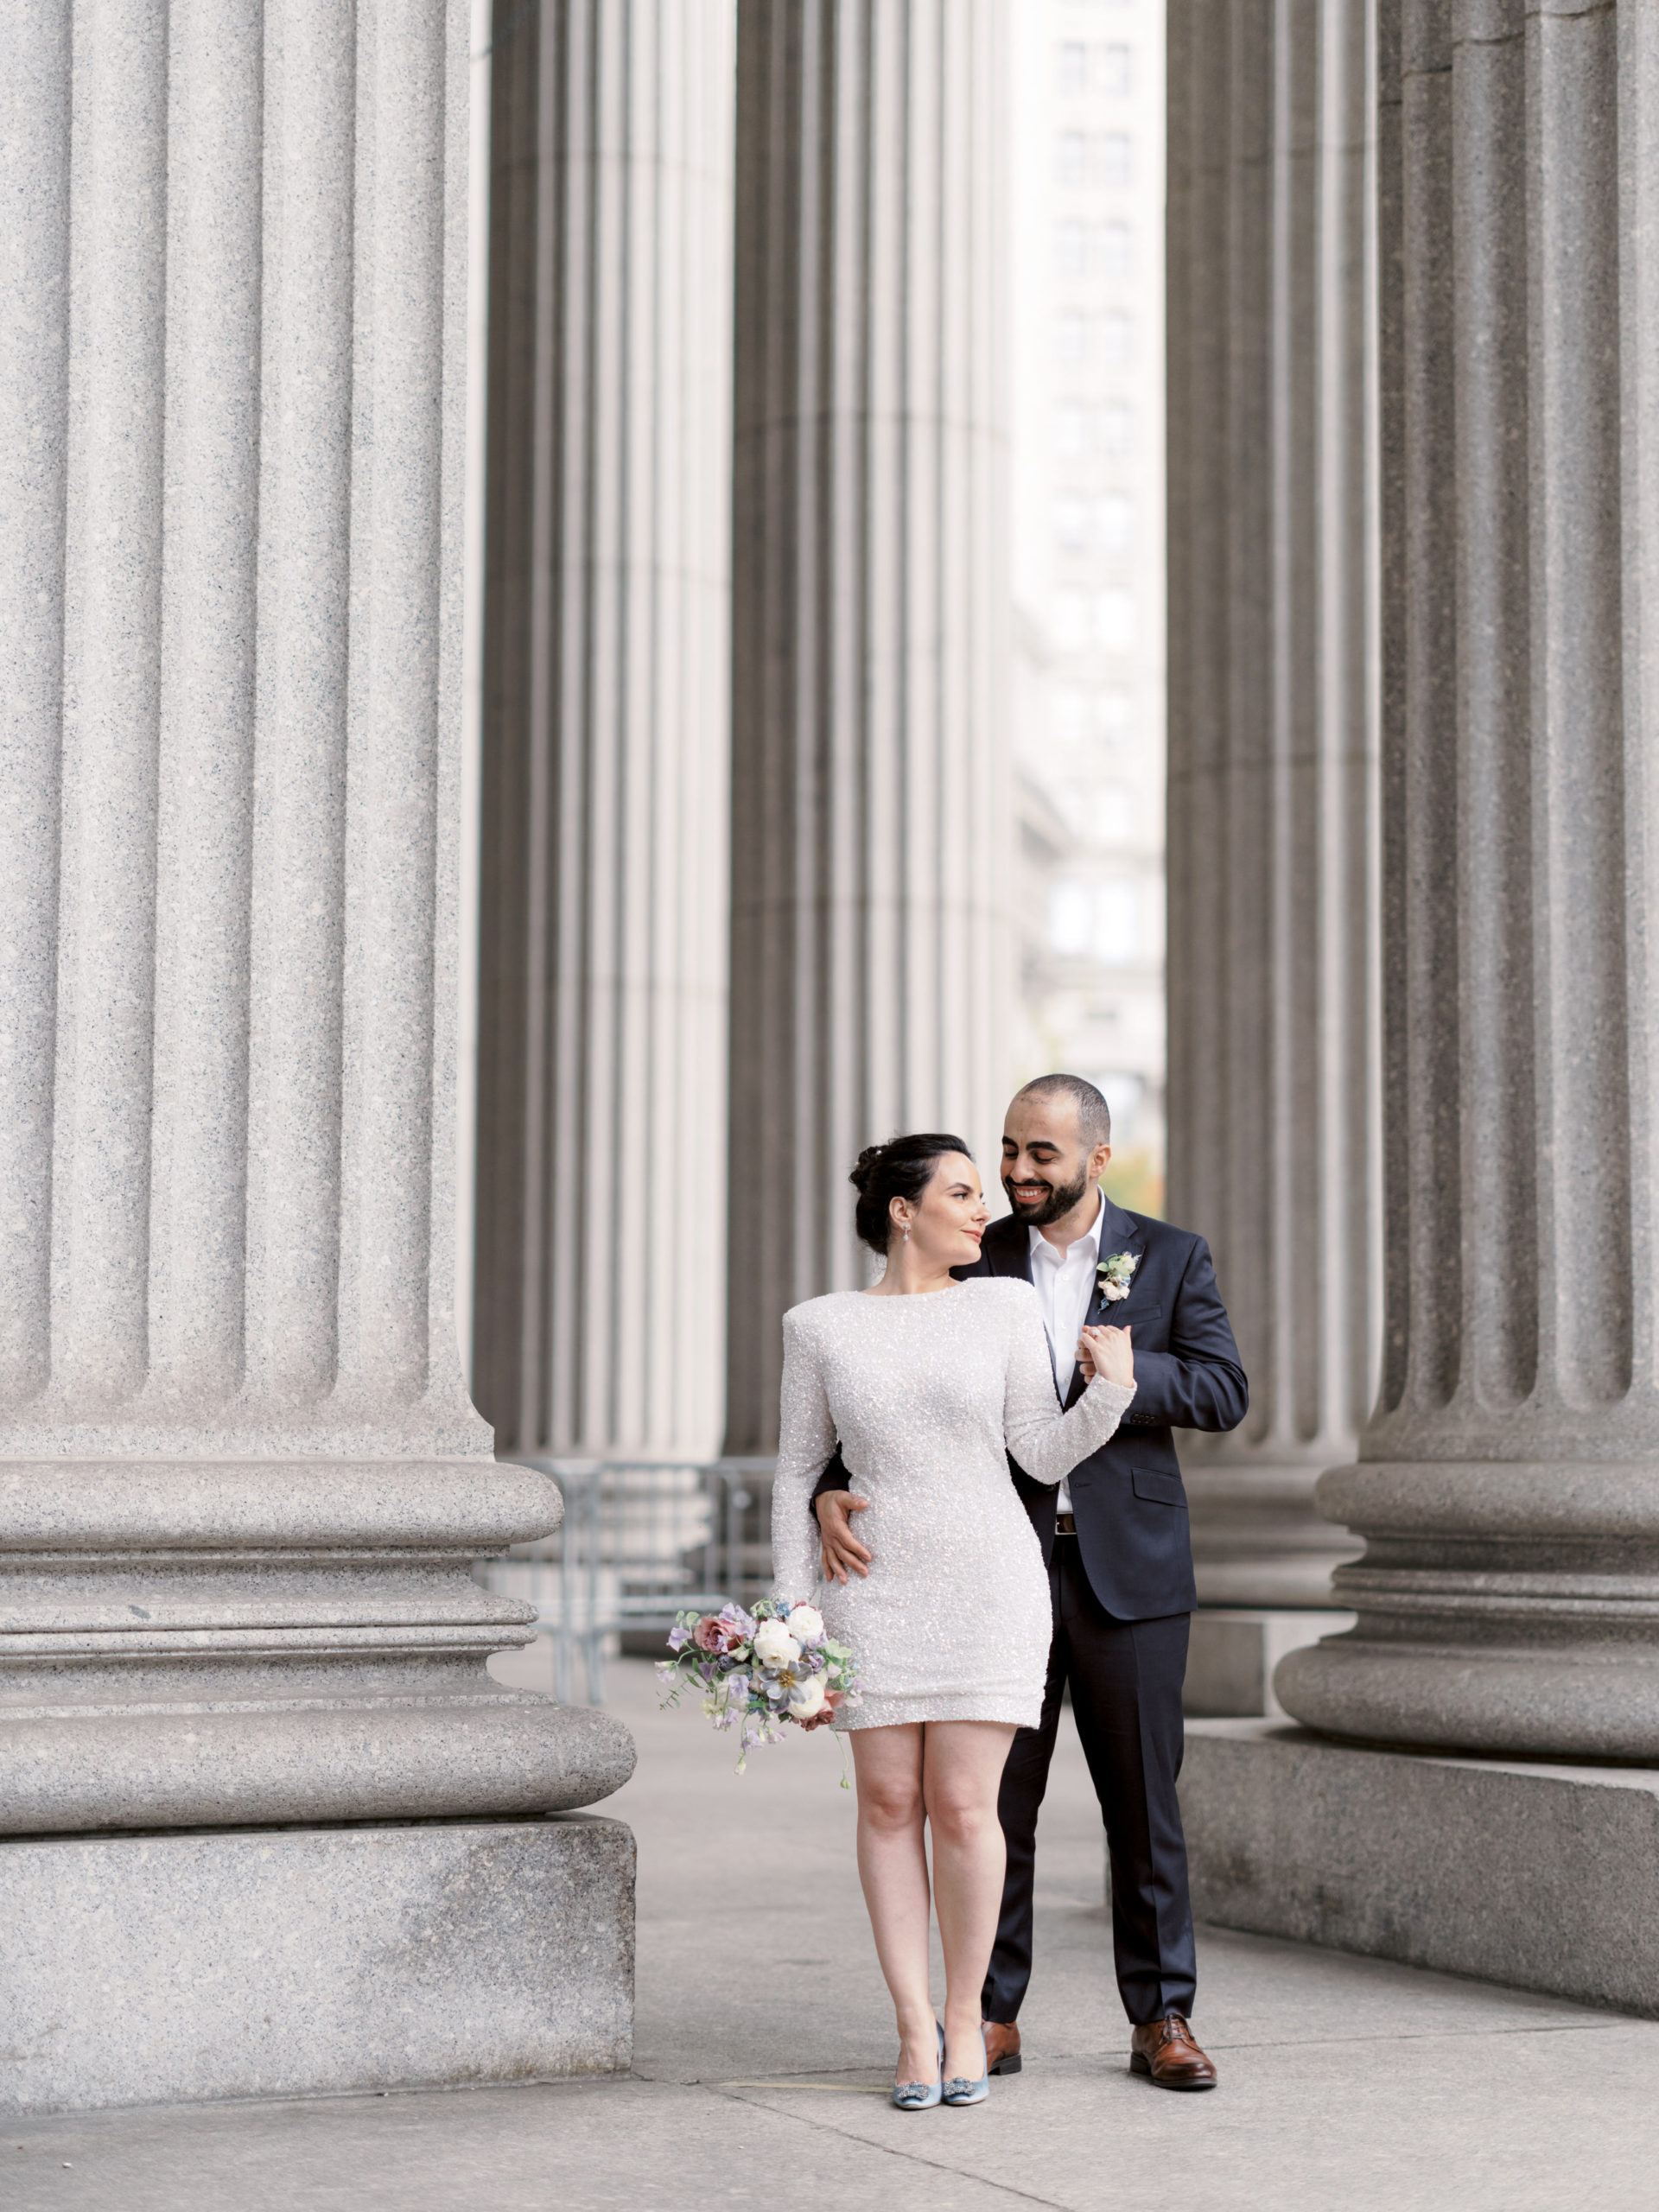 The couple are standing in the middle of large columns in NYC City Hall Building. Editorial elopement Image by Jenny Fu Studio